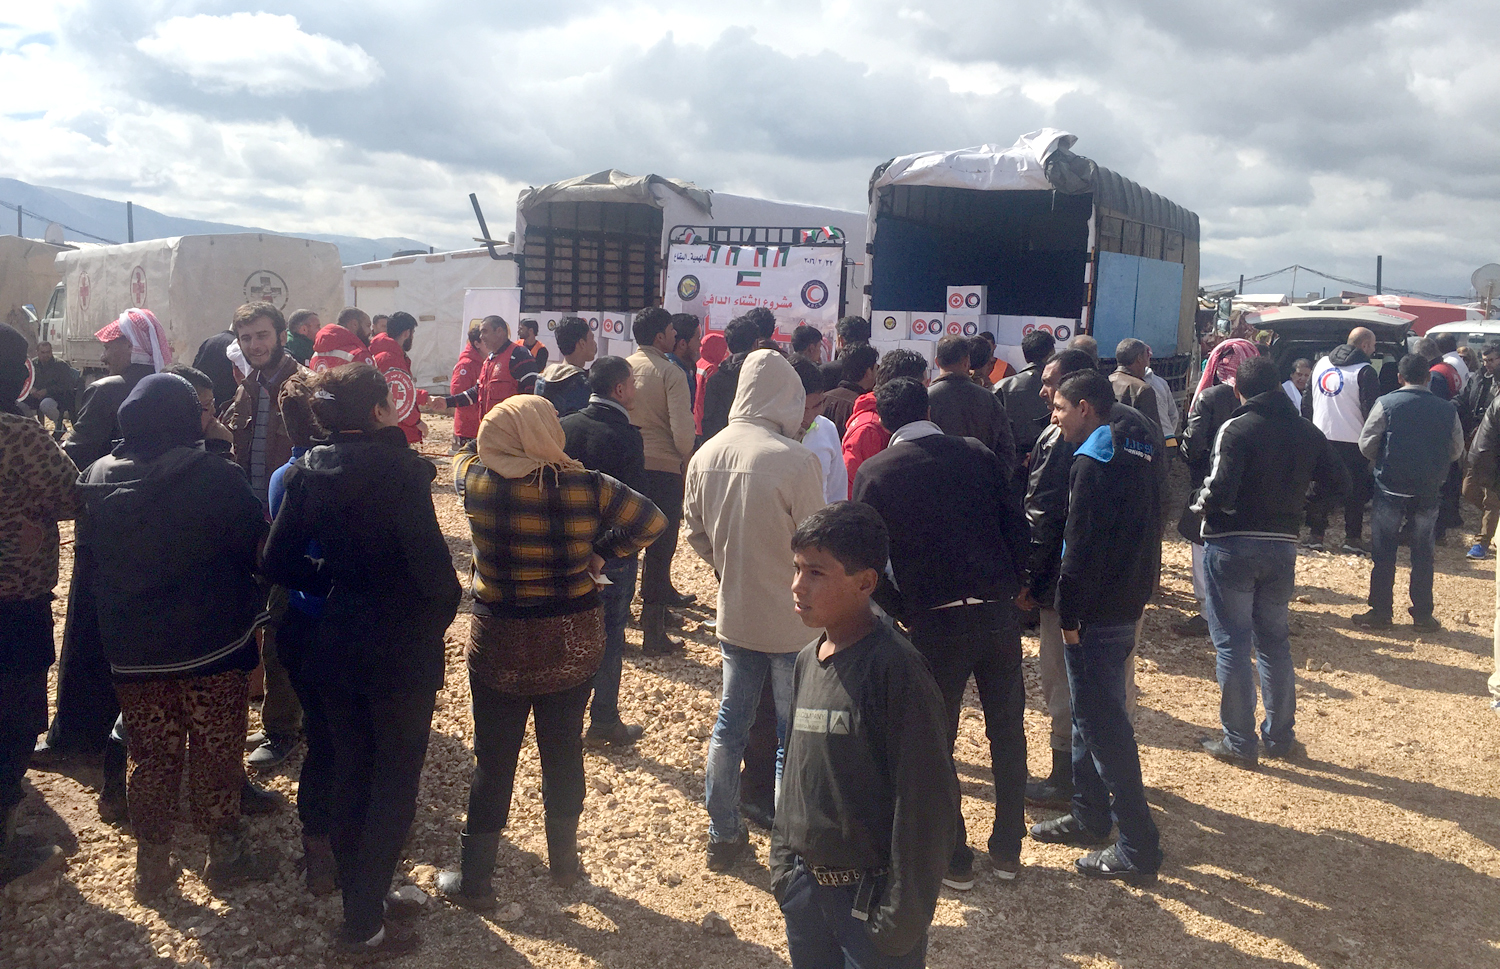 KRCS continues delivering aid to Syrian refugees in Lebanon